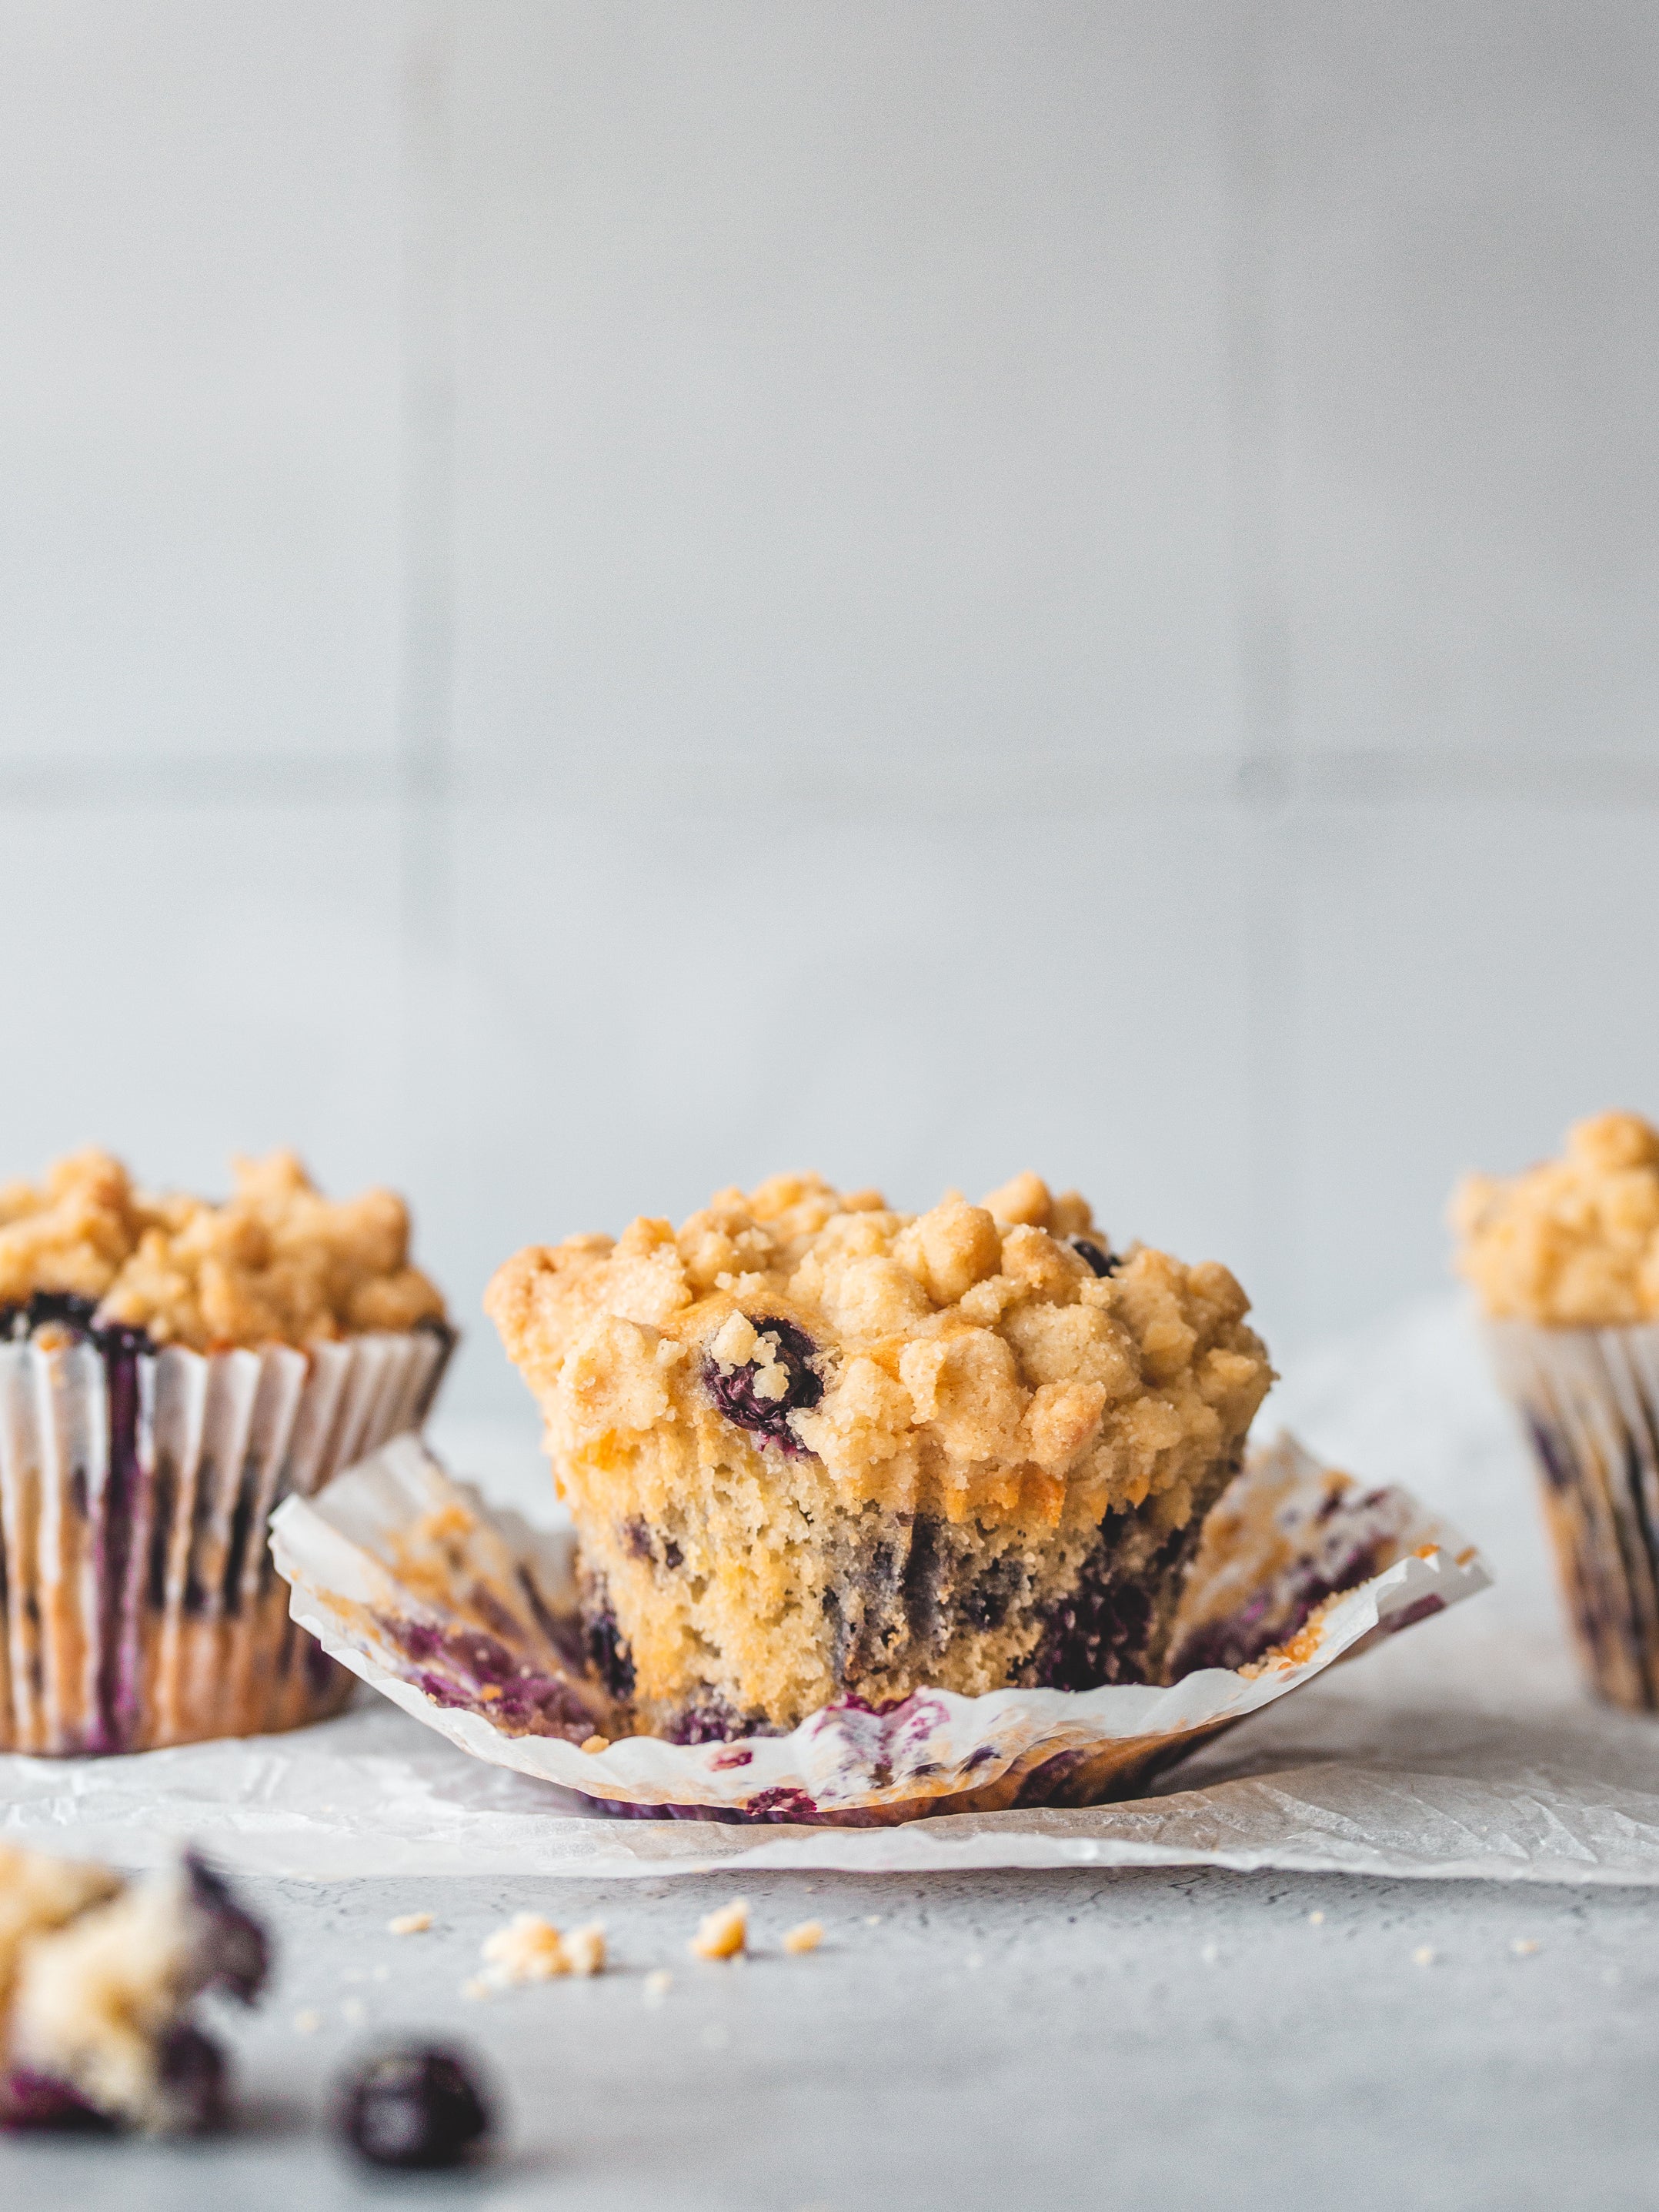 Packed with fruit, these muffins come with a crunchy streusel topping